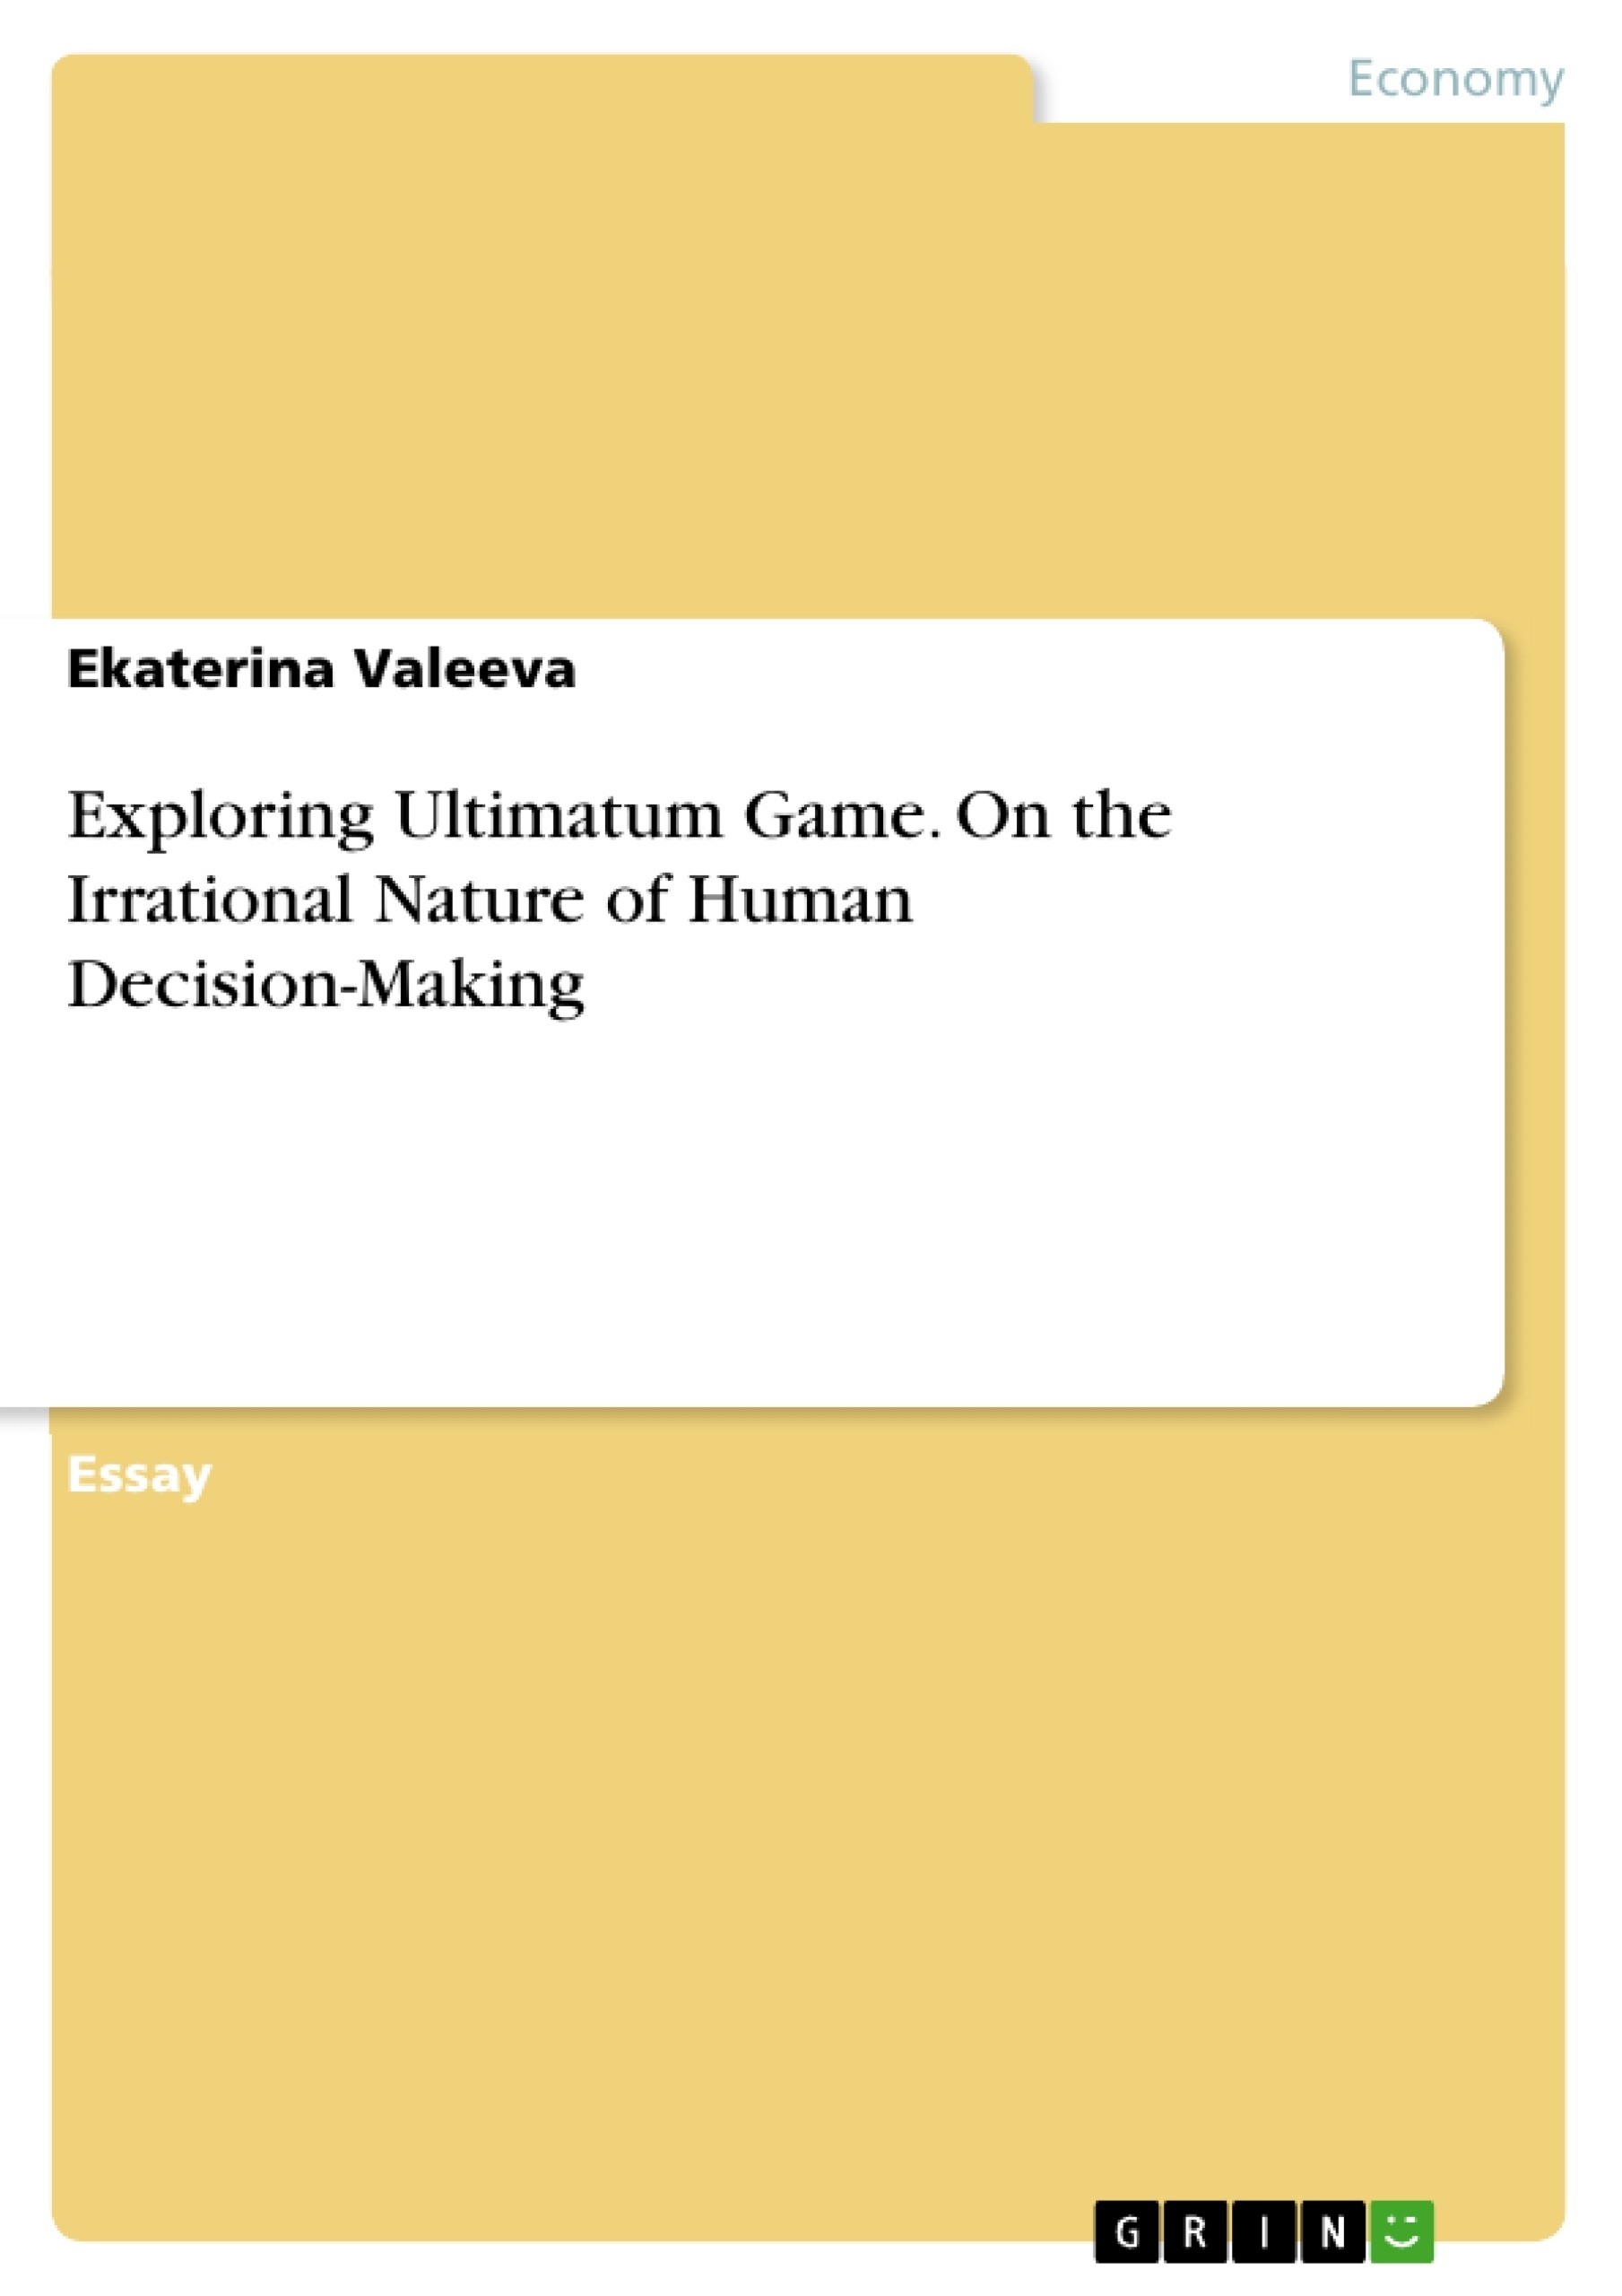 Título: Exploring Ultimatum Game. On the Irrational Nature of Human Decision-Making